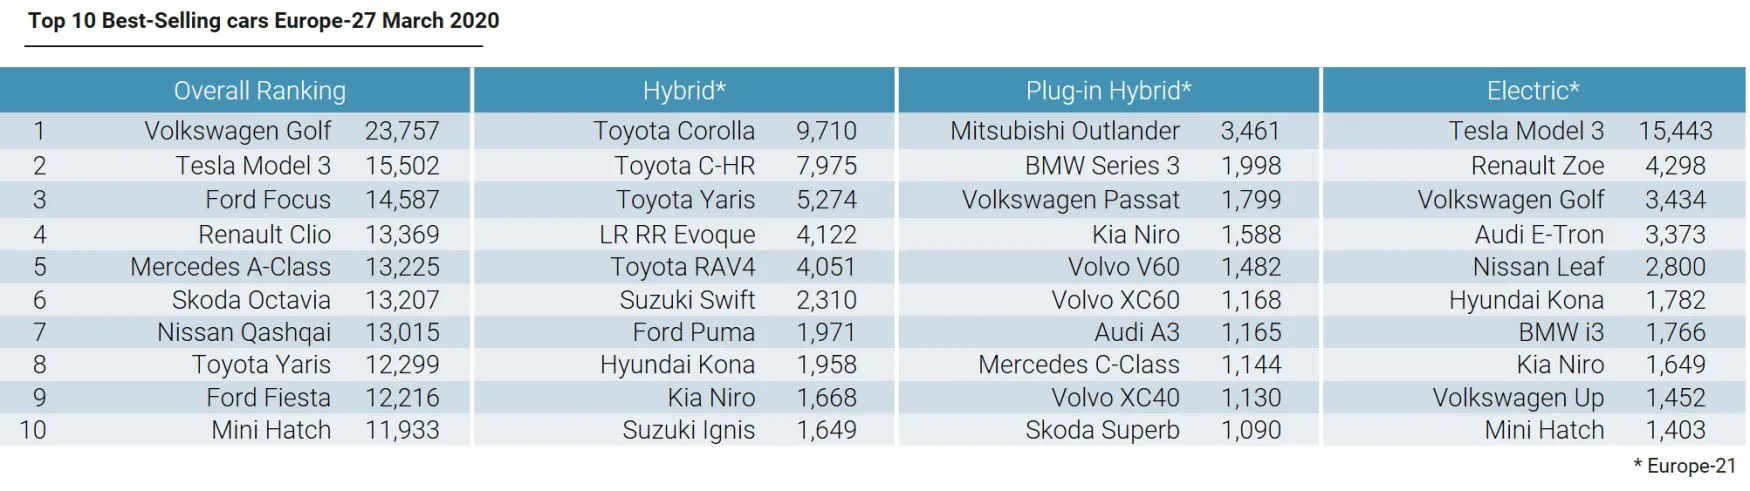 EU best-selling cars March 2020